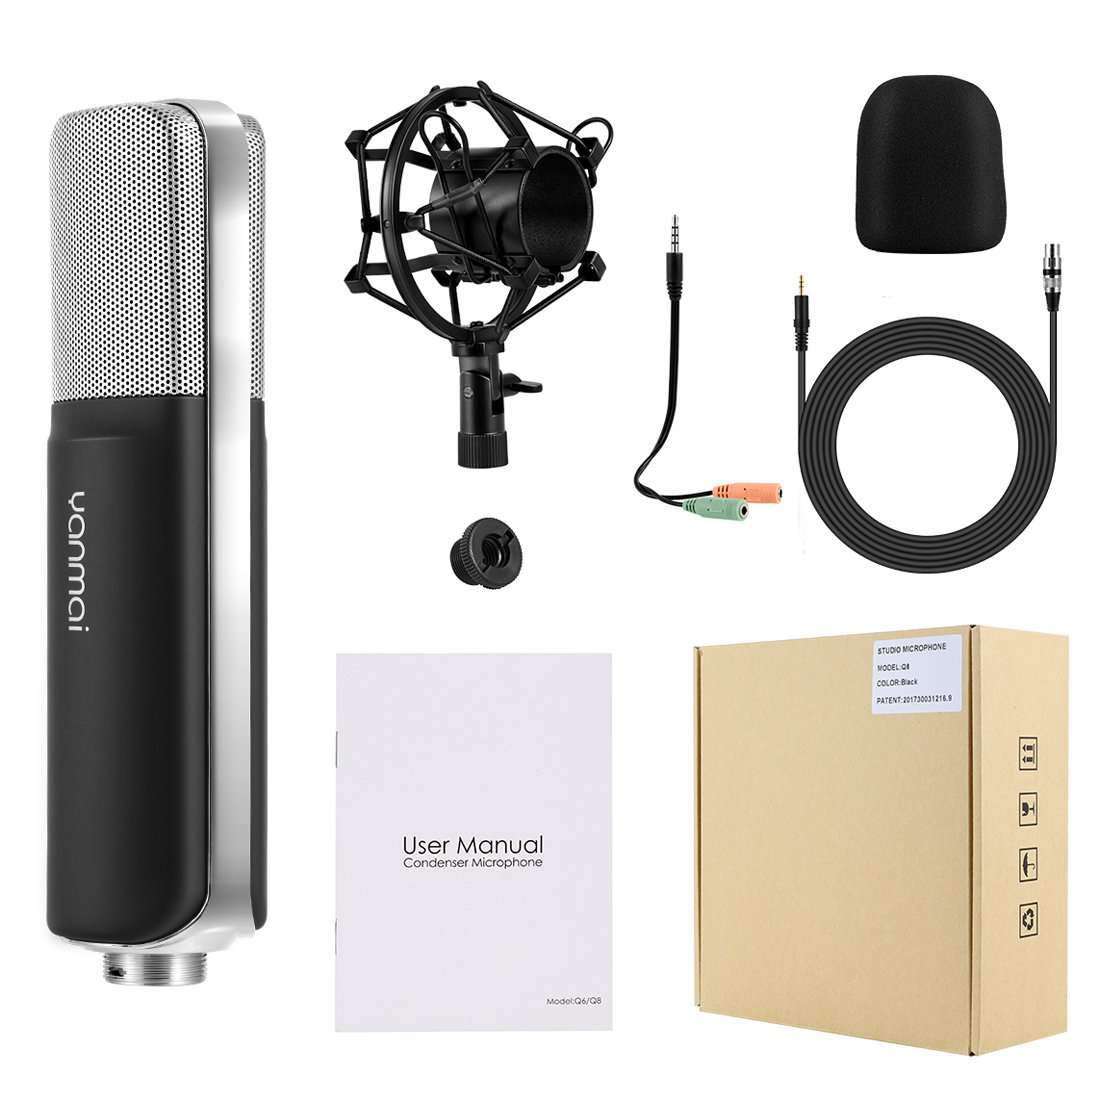 Professional Game Condenser Sound Recording Microphone with Holder, Compatible with PC and Mac for  Live Broadcast Show, KTV, etc.(Black)